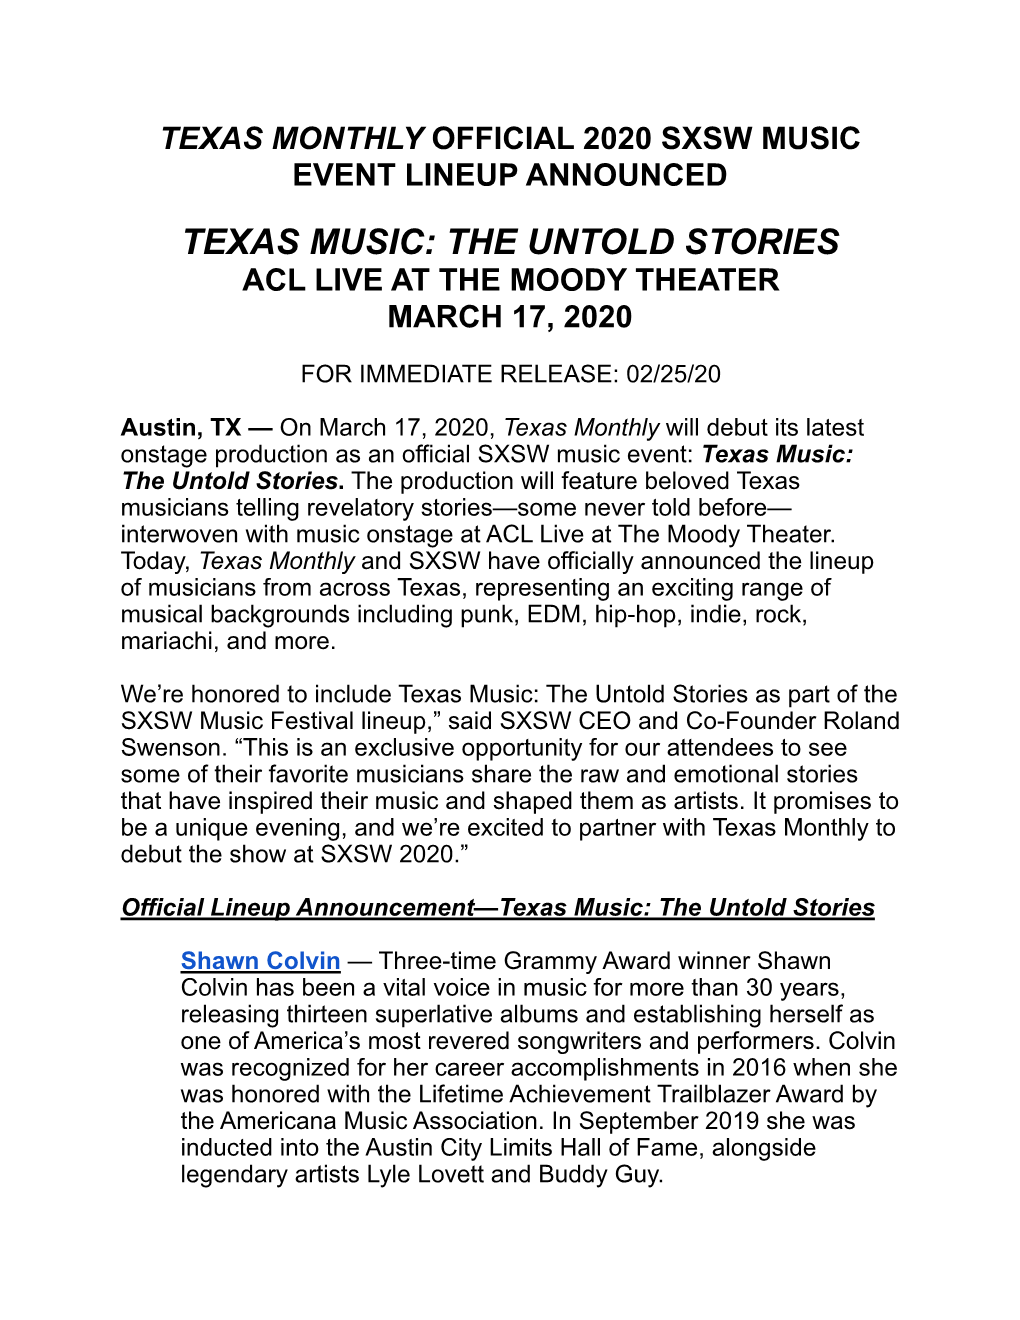 Texas Monthly Official 2020 Sxsw Music Event Lineup Announced